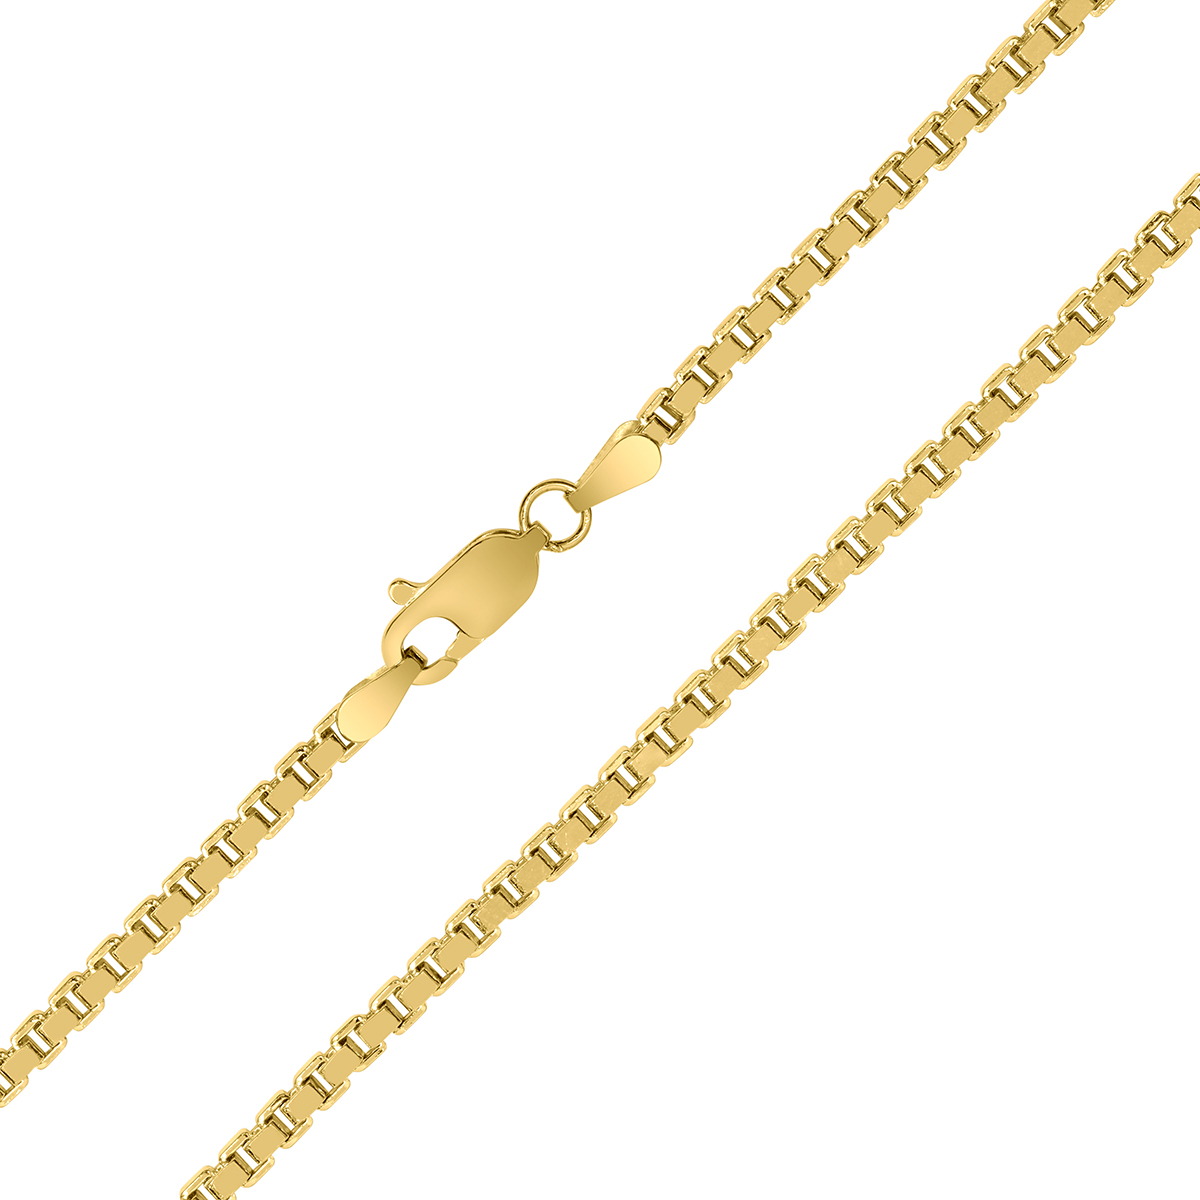 14K Yellow Gold 2.5mm Shiny Square Hollow Classic Box Chain with Lobster Clasp - 20 inch